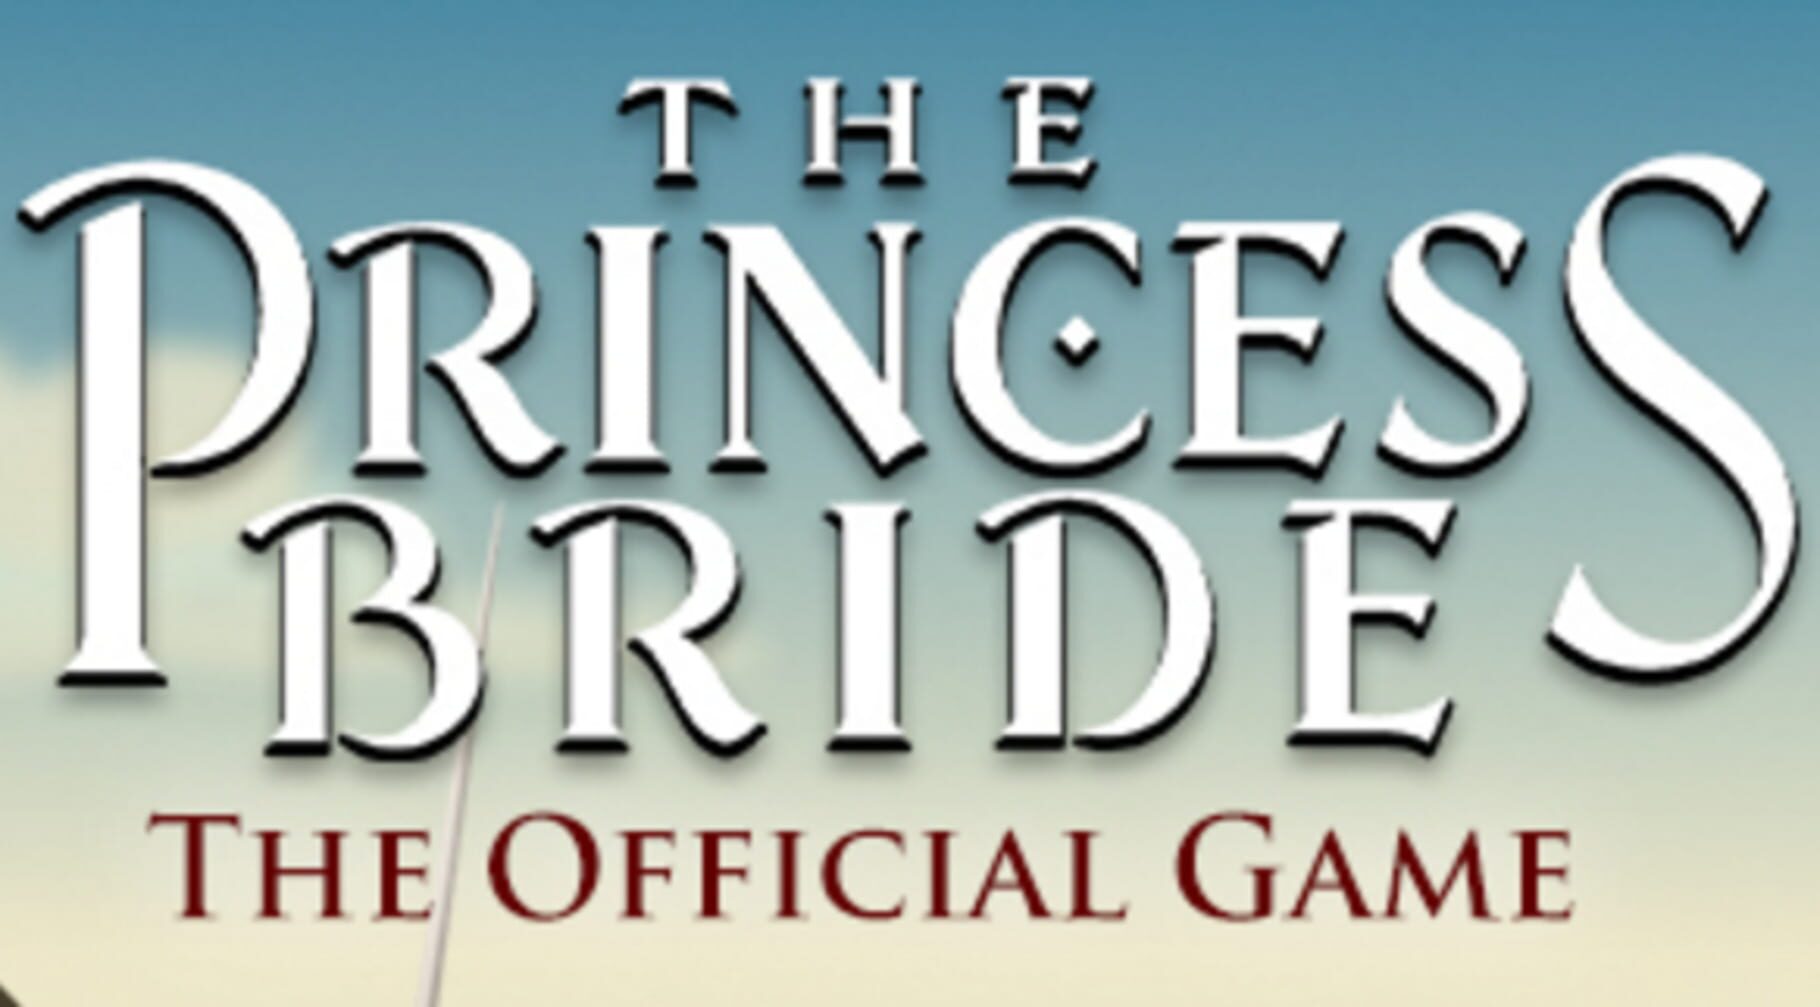 The Princess Bride: The Official Game